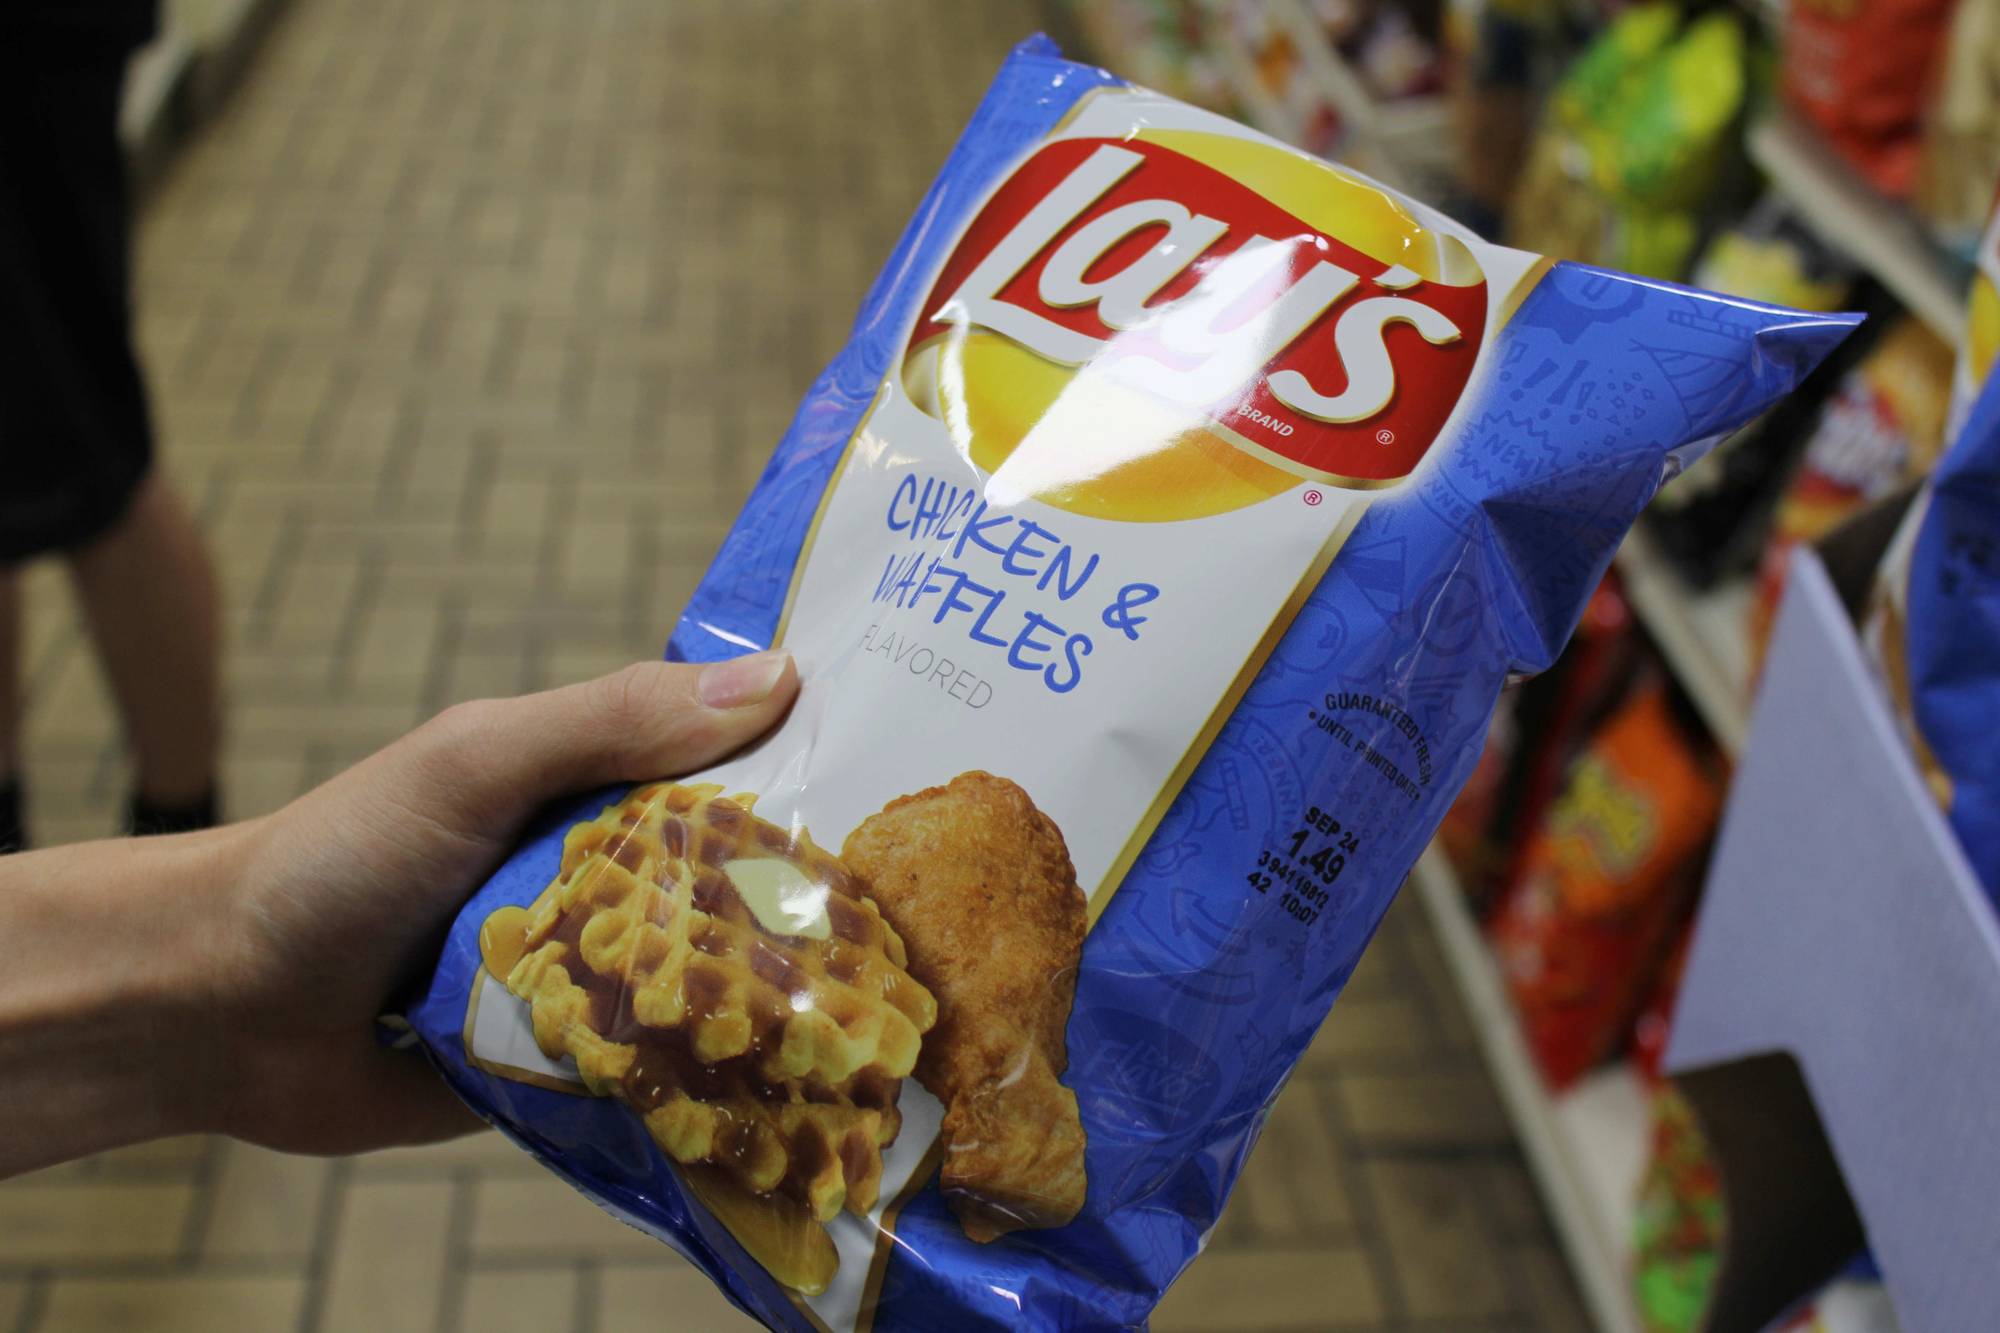 Chicken & Waffles flavoured Lay’s